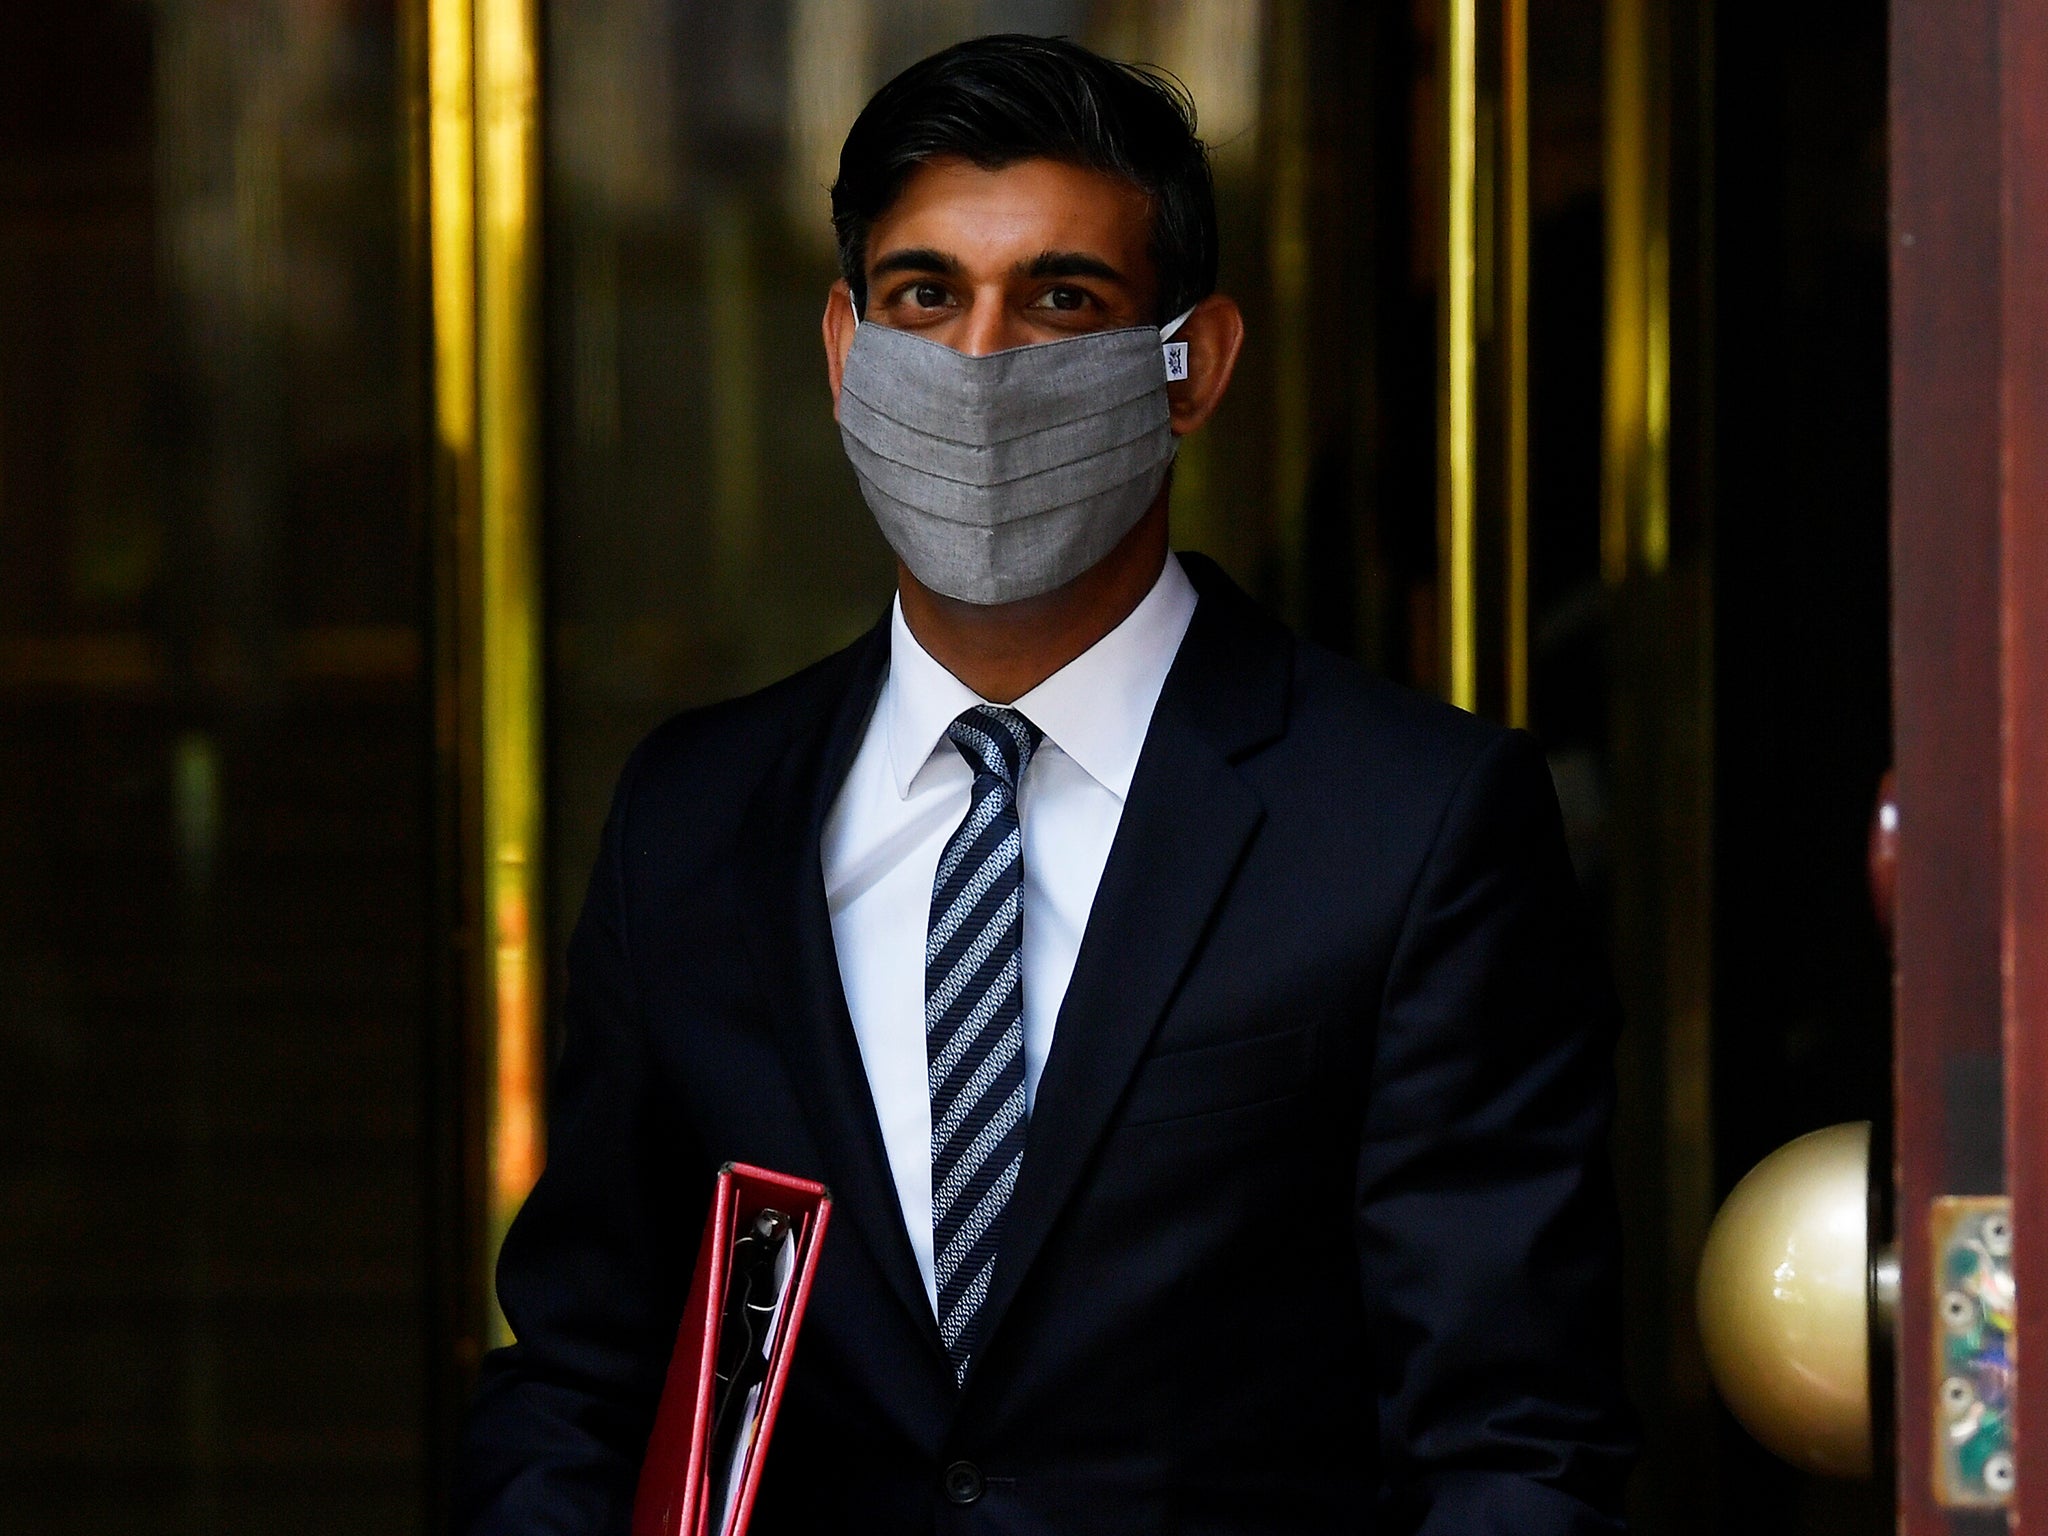 Rishi Sunak has acted to support firms hit by local lockdowns